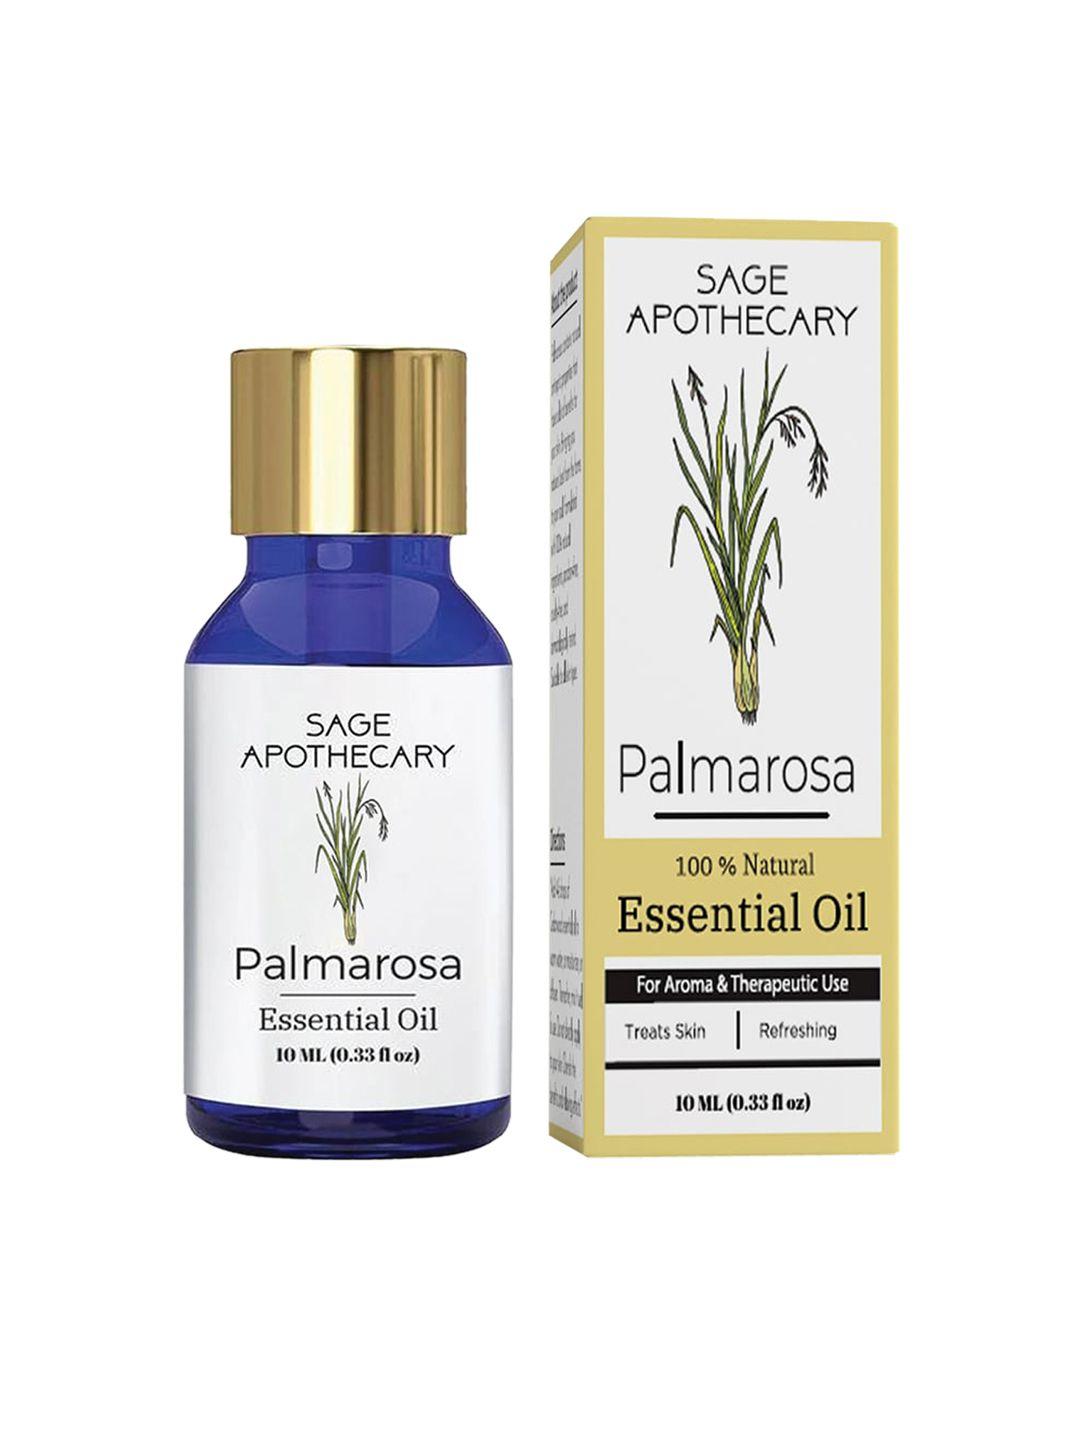 sage apothecary palmarosa essential oil for skin treating & refreshing effect - 10ml